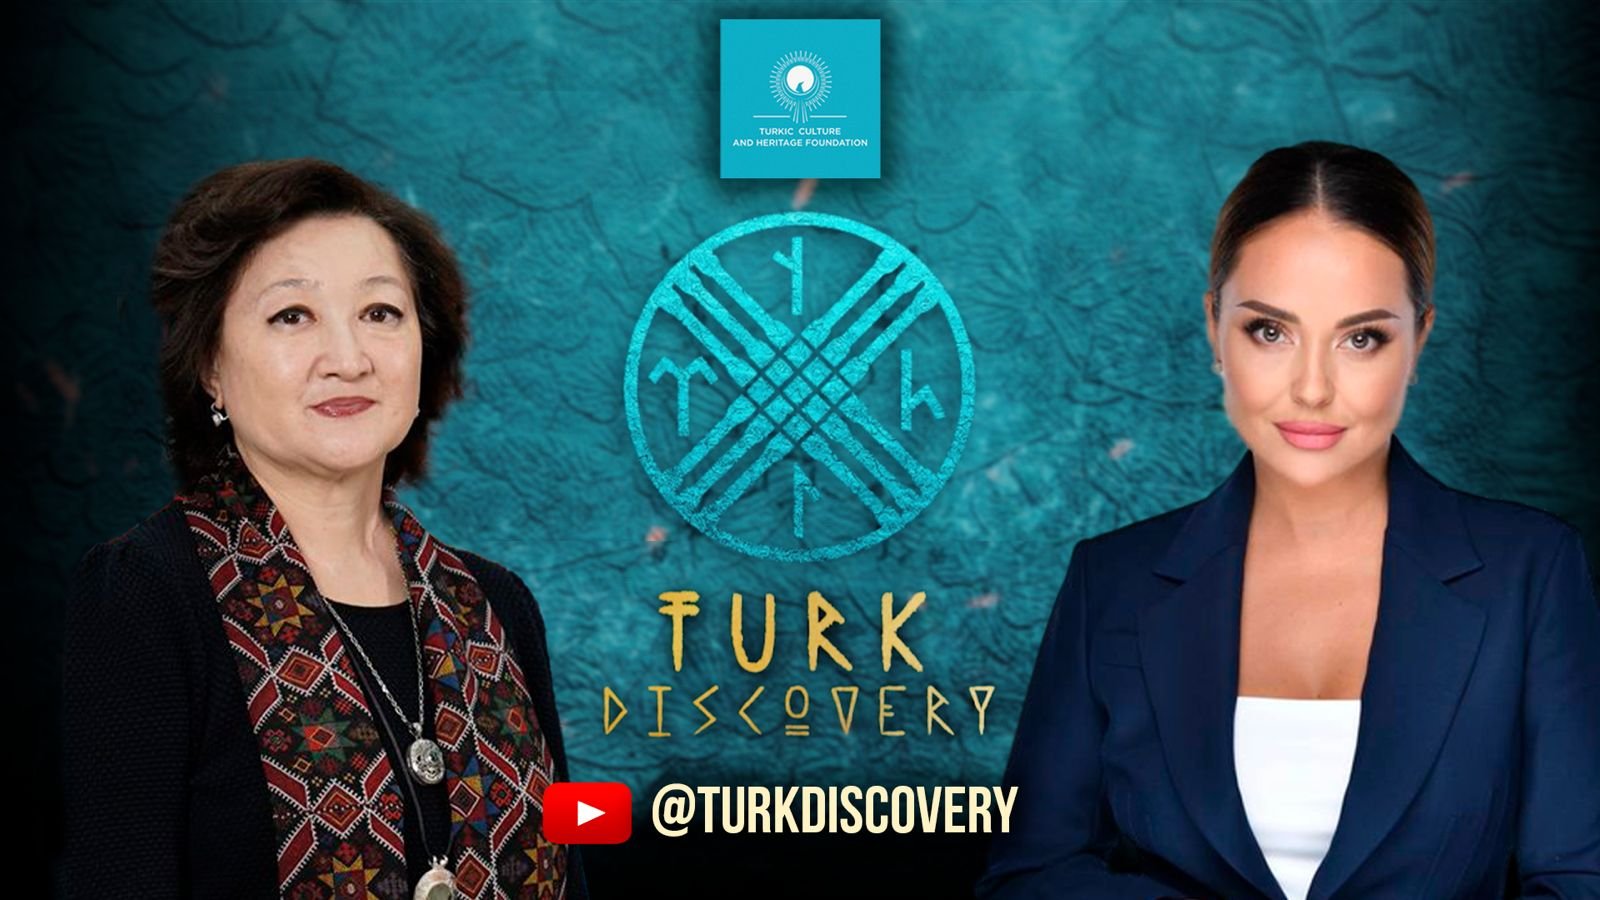 The Turkic Culture and Heritage Foundation presents a new project "TURK DISCOVERY" on the YOUTUBE platform